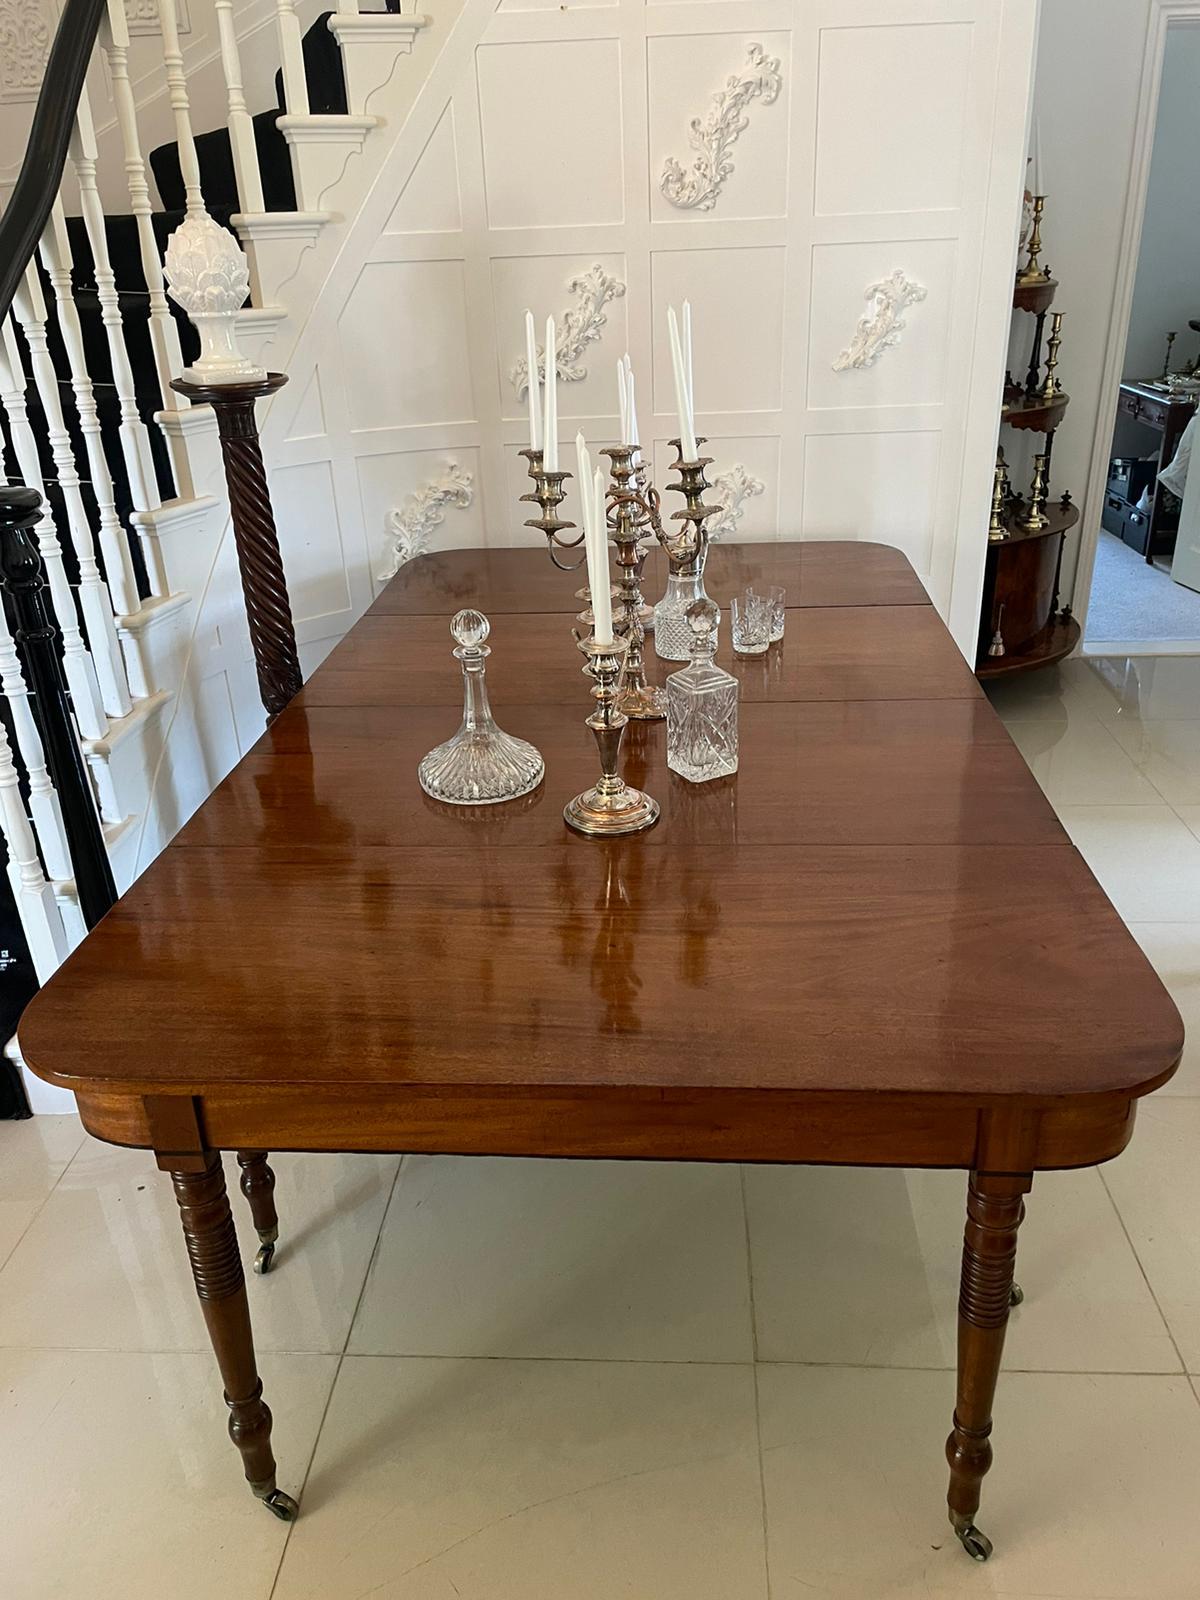 Antique George III quality figured mahogany dining table having a quality figured mahogany top with 2 original extra leaves, mahogany shaped frieze standing on 8 turned tapering mahogany legs with original brass cup castors 

This quality